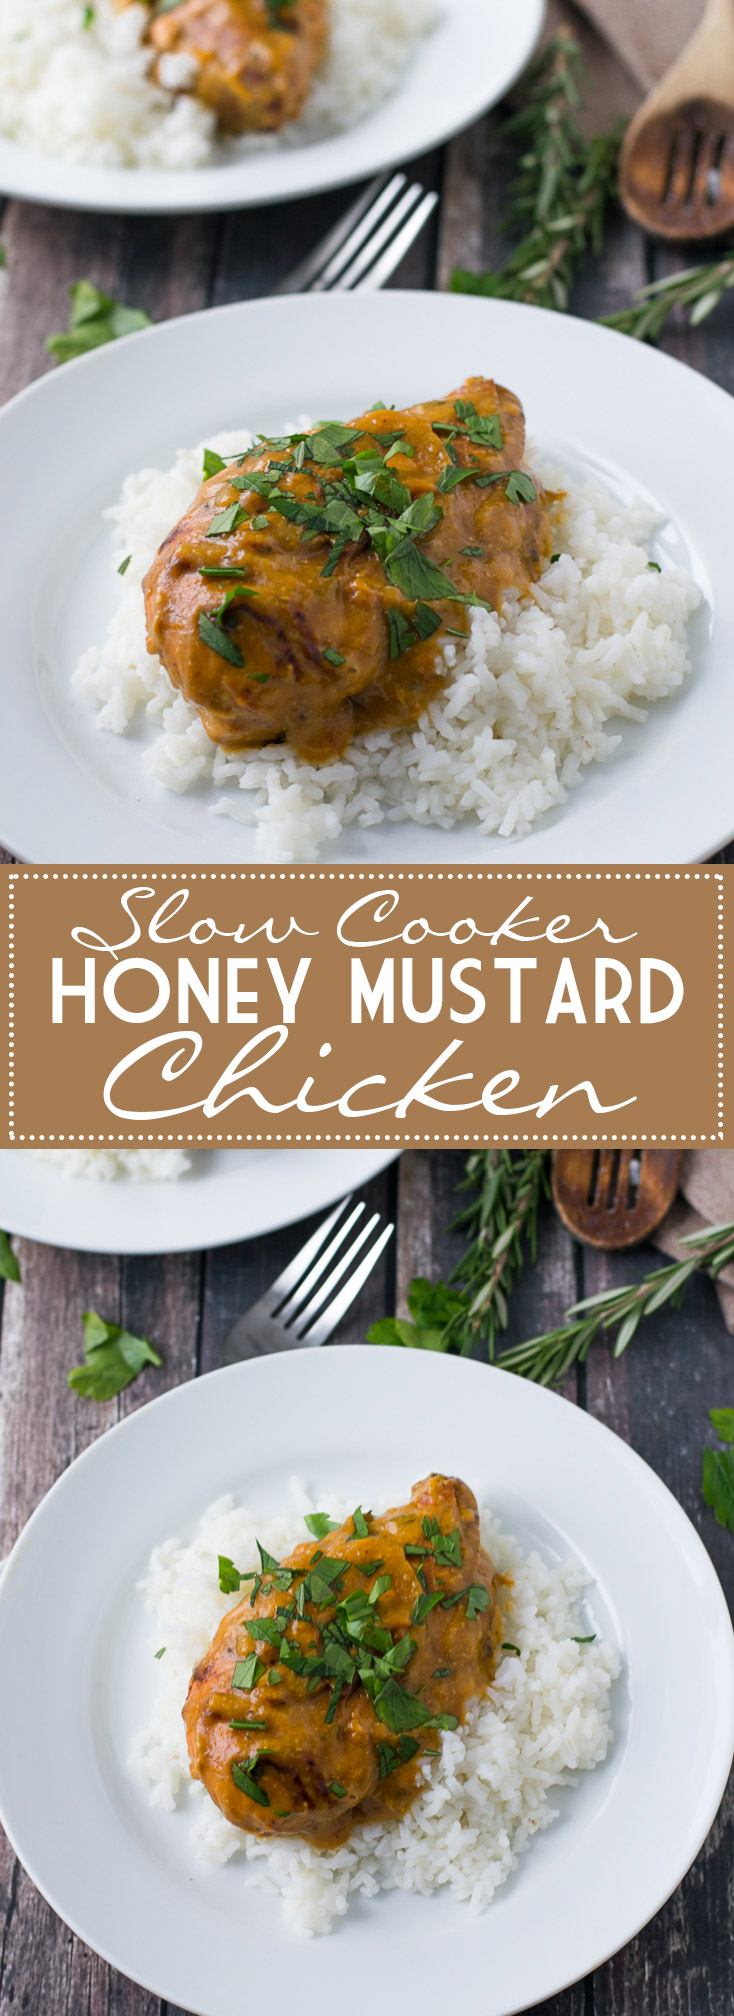 Yummy Slow Cooker Honey Mustard Chicken. You can easily sub out the honey for maple syrup for Maple Mustard Chicken. So good! | www.motherthyme.com